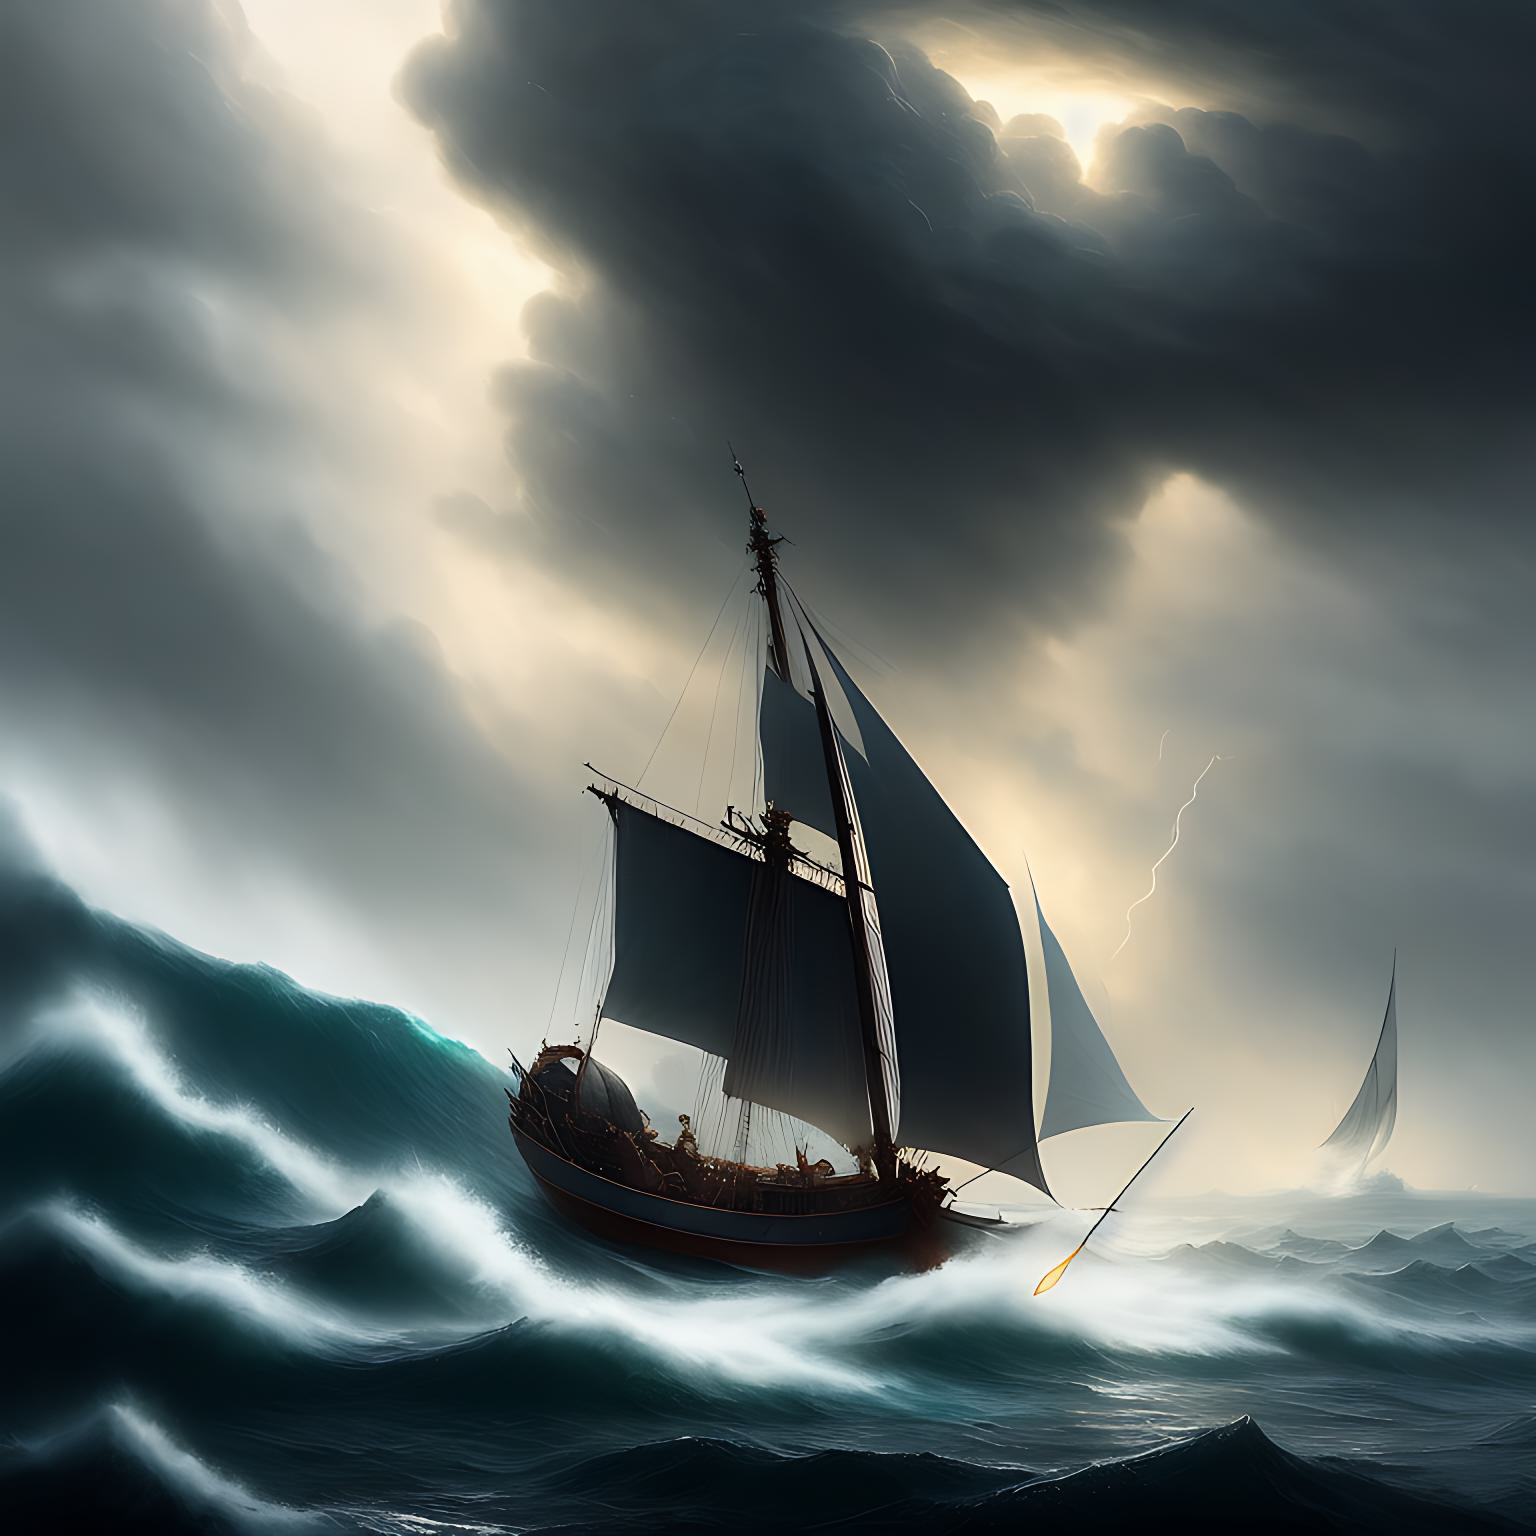 a boat on stormy seas struggling to stay afloat